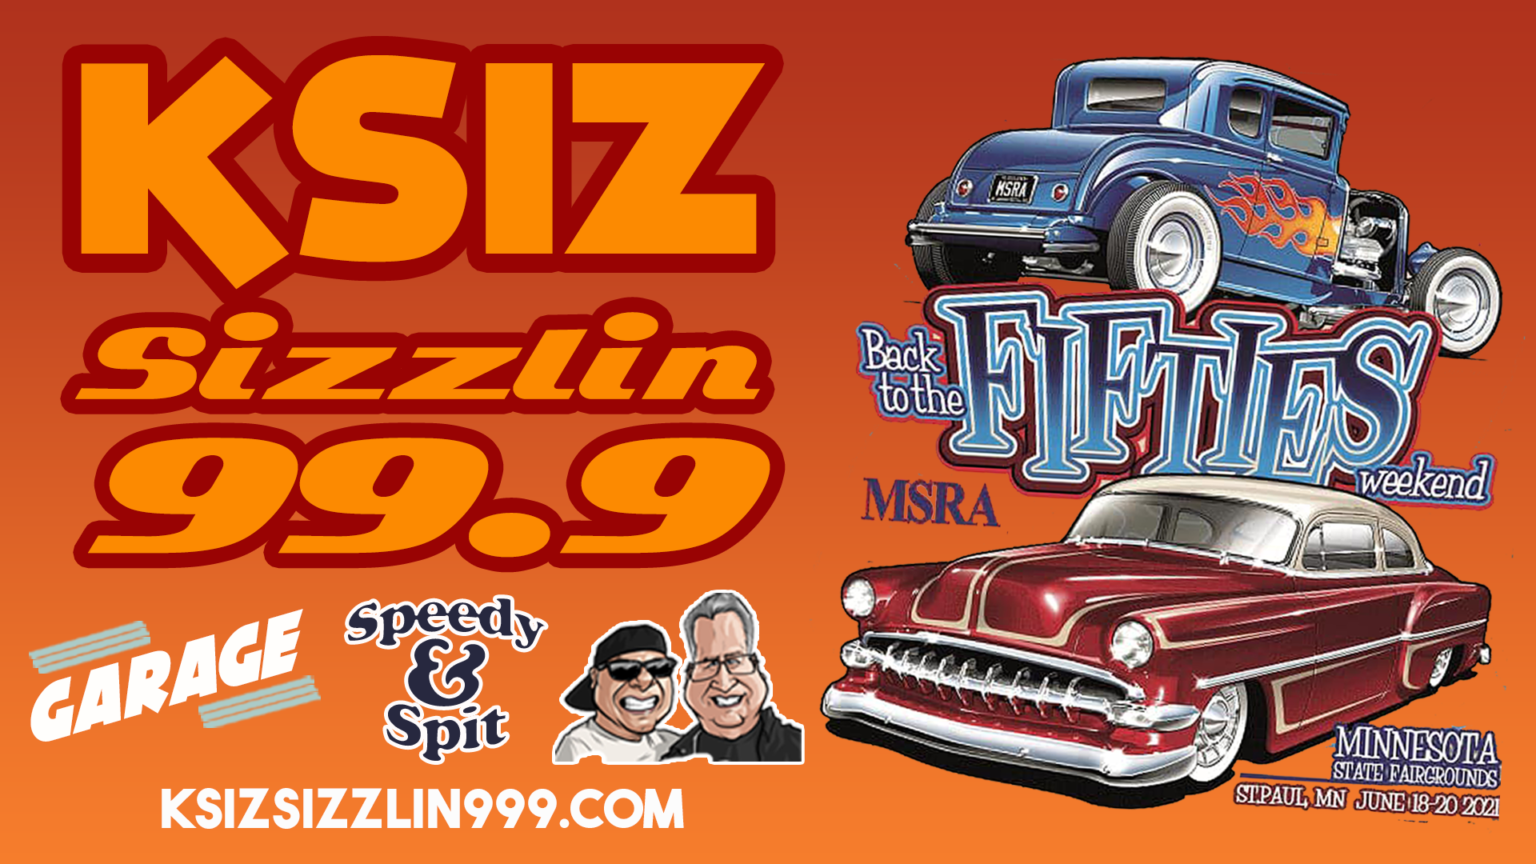 MSRA Back to the Fifties Car Show June 18th through the 20th KSIZ